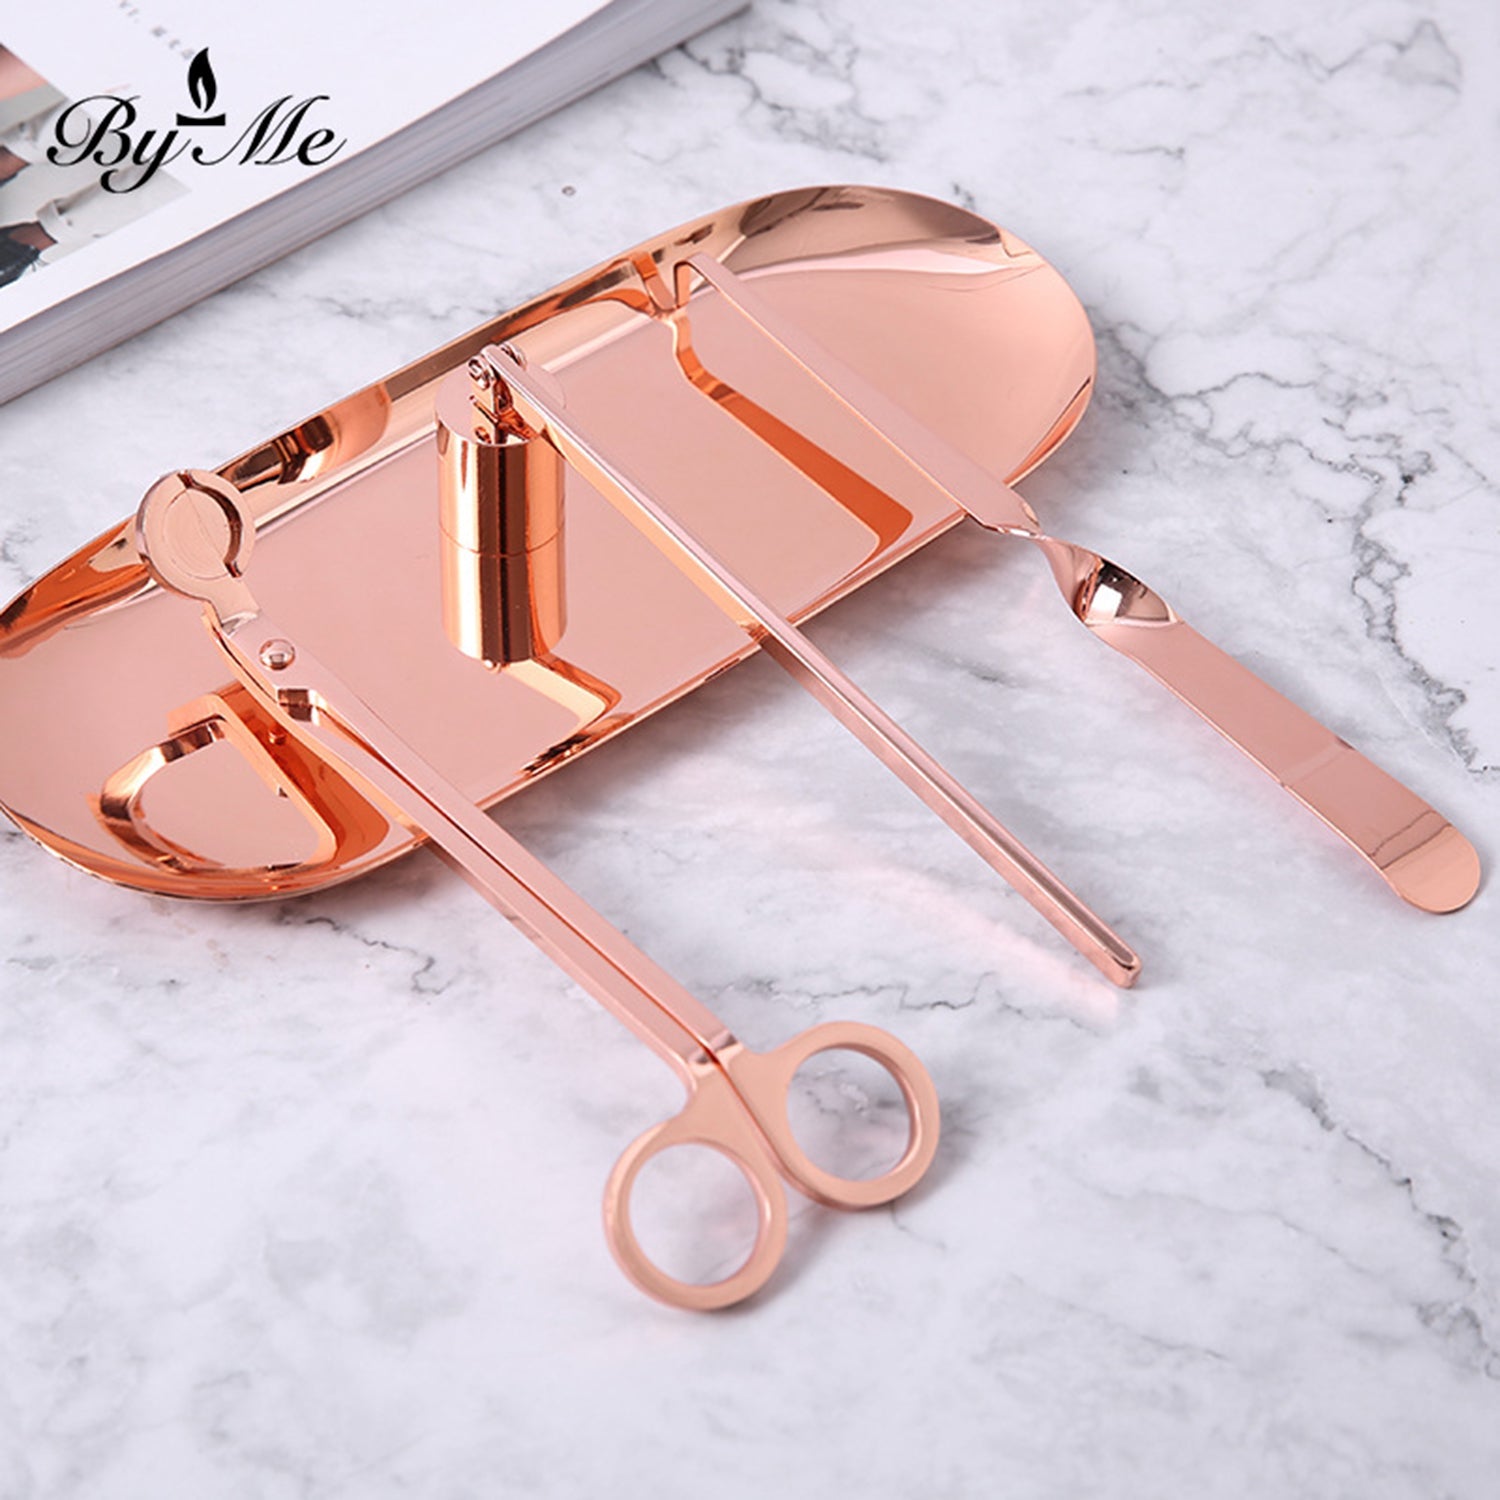 Aromatherapy Candle Tools Set Stainless Steel Candle Extinguisher Accessory 4-in-1 Set Scented Candle Accessories OEM Rose Gold 